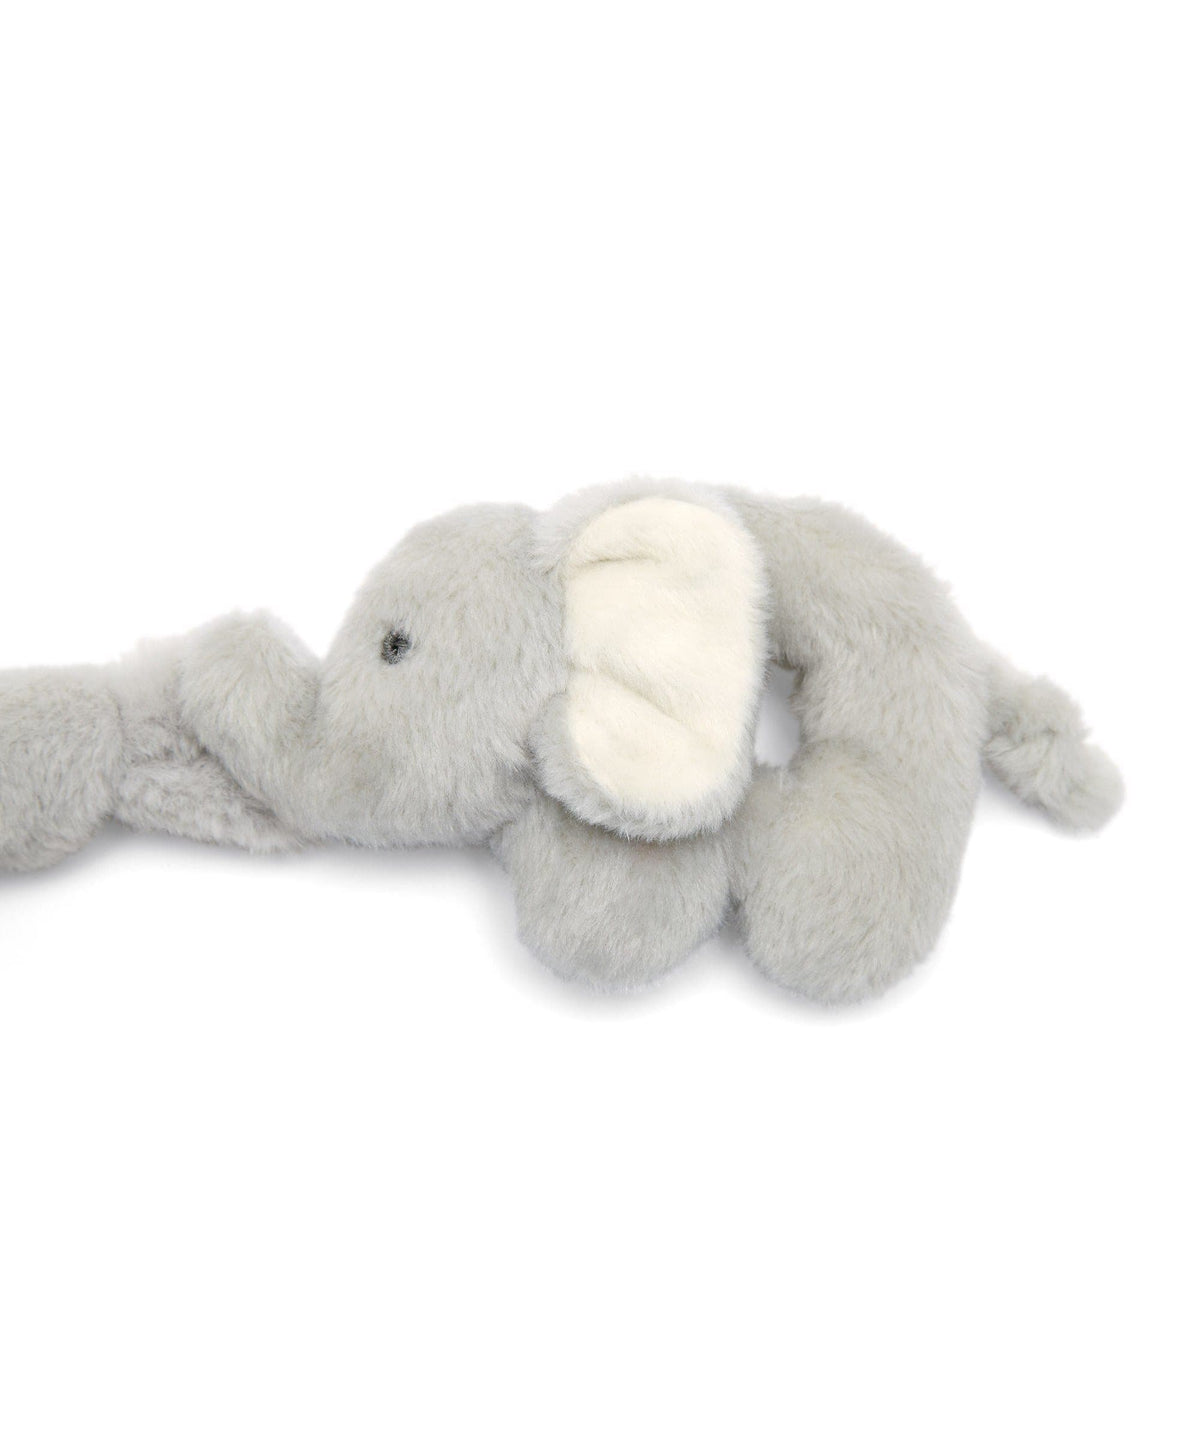 Best-Selling Online Store Tummy Time Snugglerug - Elephant & Baby delivery  to United States free